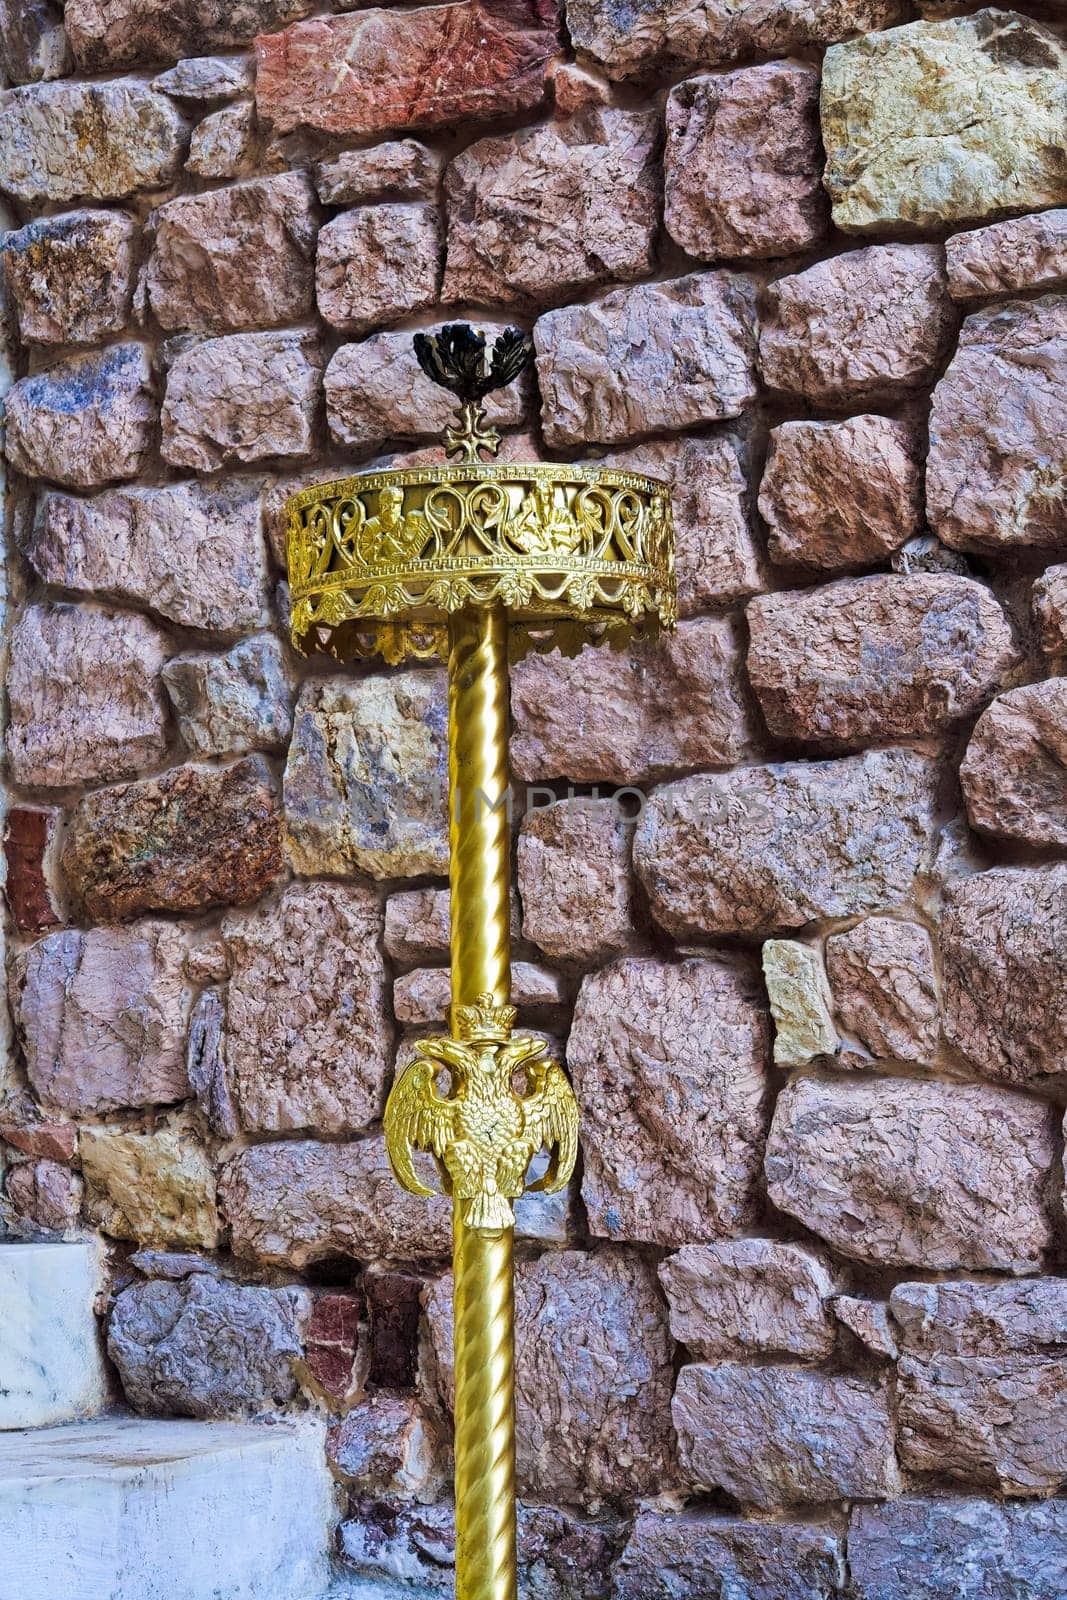 A golden candle holder with the double-headed eagle symbol of the Byzantine Empire outside a stone brick wall.